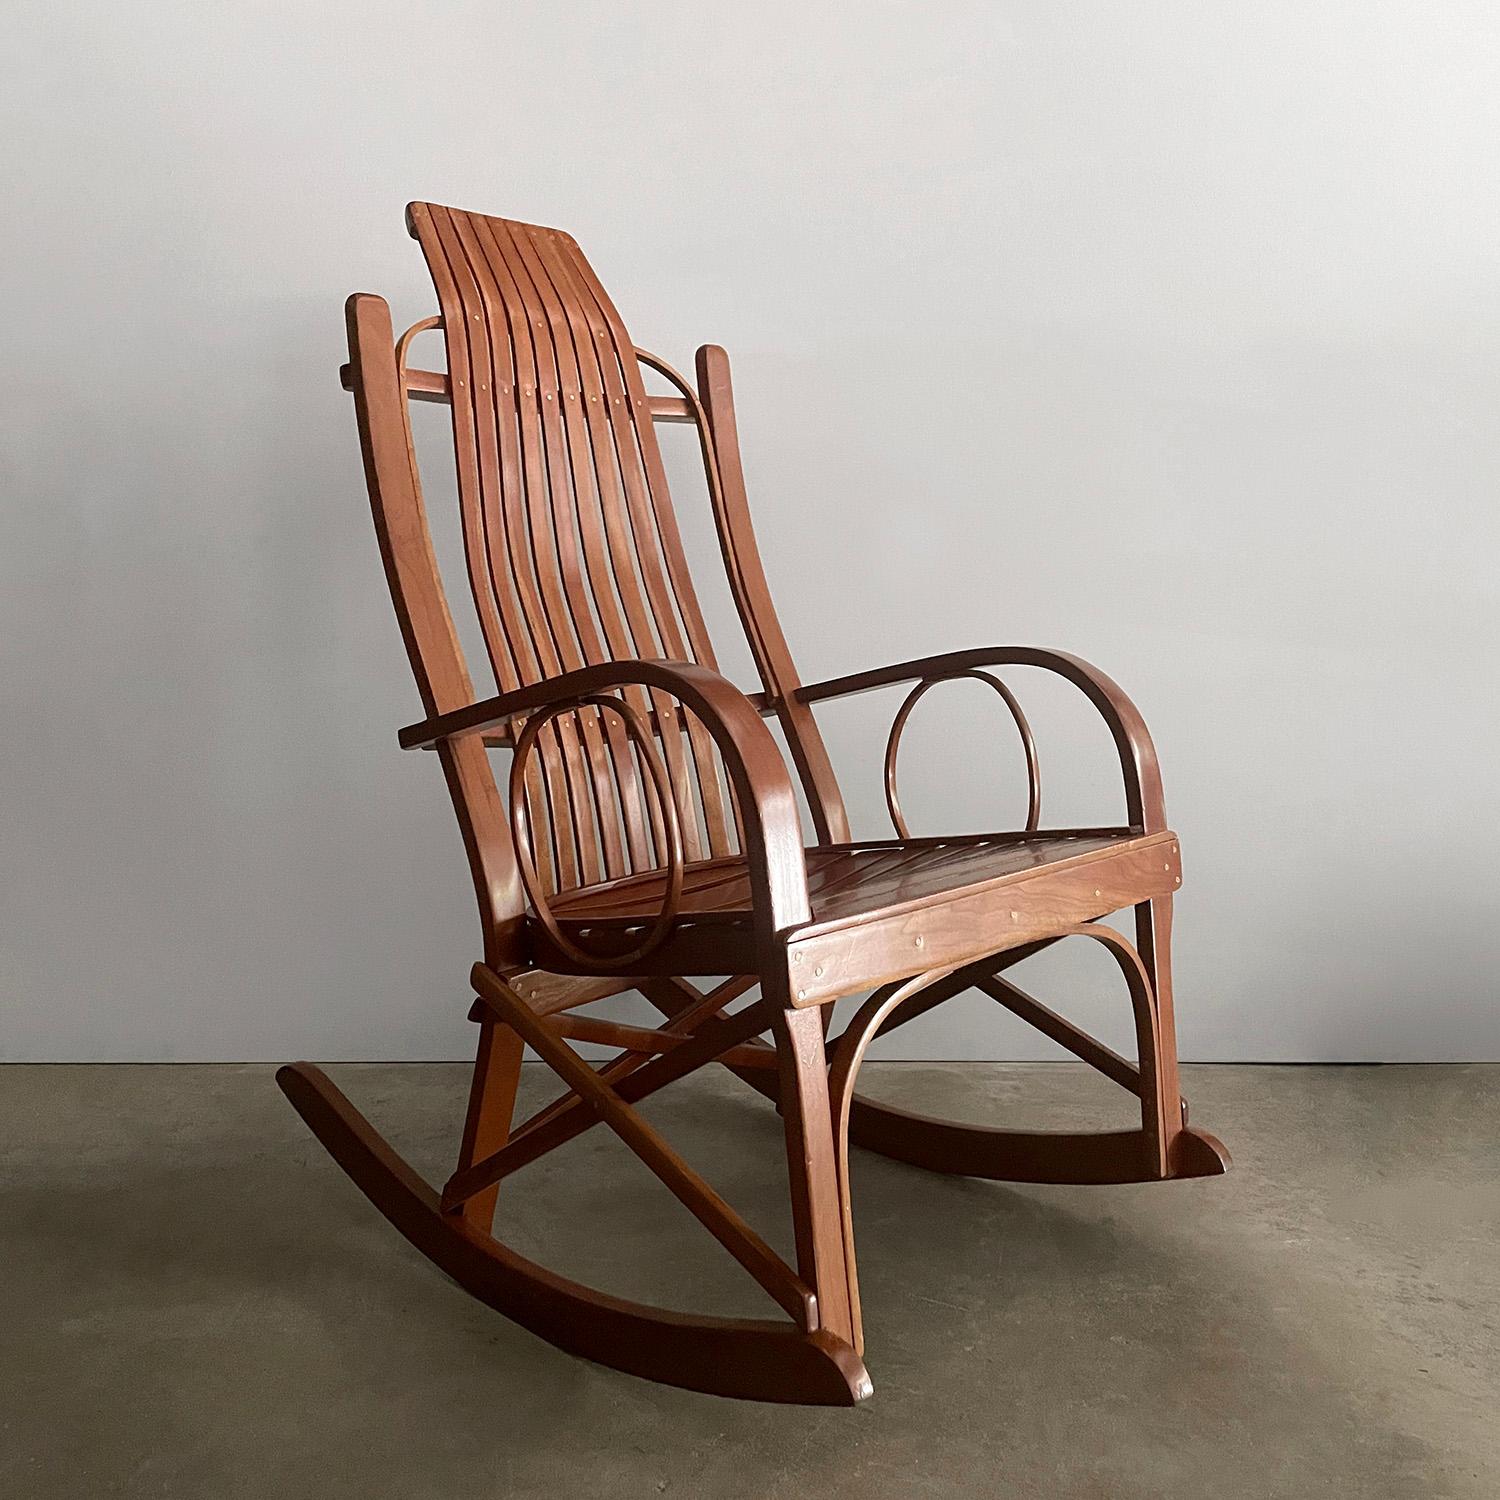 Antique arts & crafts rocking chair
Beautifully handcrafted artisanal piece
This handsome chair is making us long for relaxing days in the sun room or porch with a good book
Constructed of sleek bentwood slats and finished with metal rivet details